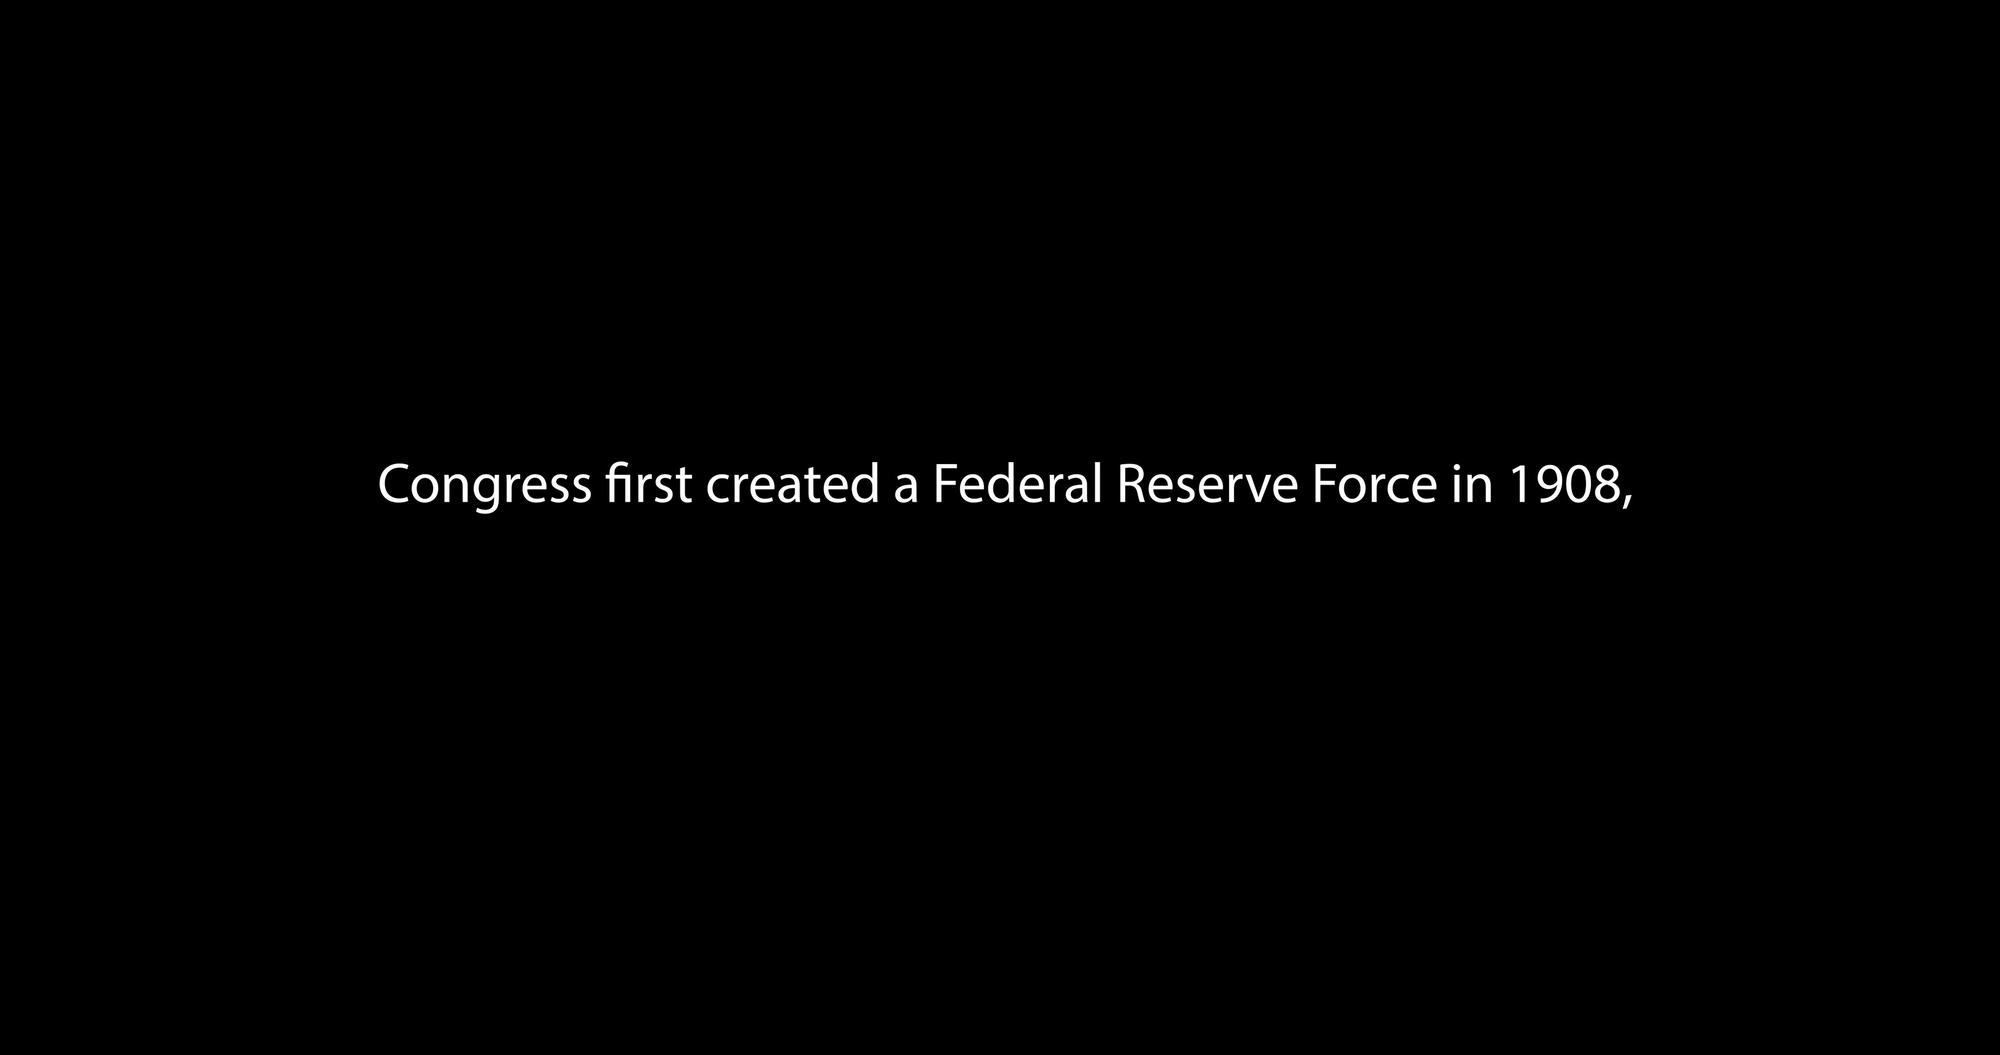 Congress first created the Army Medical Reserve Corps in 1908, to remedy wartime challenges experienced in the 1800s. Since then, the Army Reserve plays a critical role in combat support and humanitarian aid at home and abroad.

We follow Great War Soldiers in the trenches, who encounter a familiar face from back home. Stay tuned for the whole short soon!

This video was originally created in celebration of the Army Reserve's 115th Birthday.

Director: Tim Yao
Sound/ PA: Colton Huston 